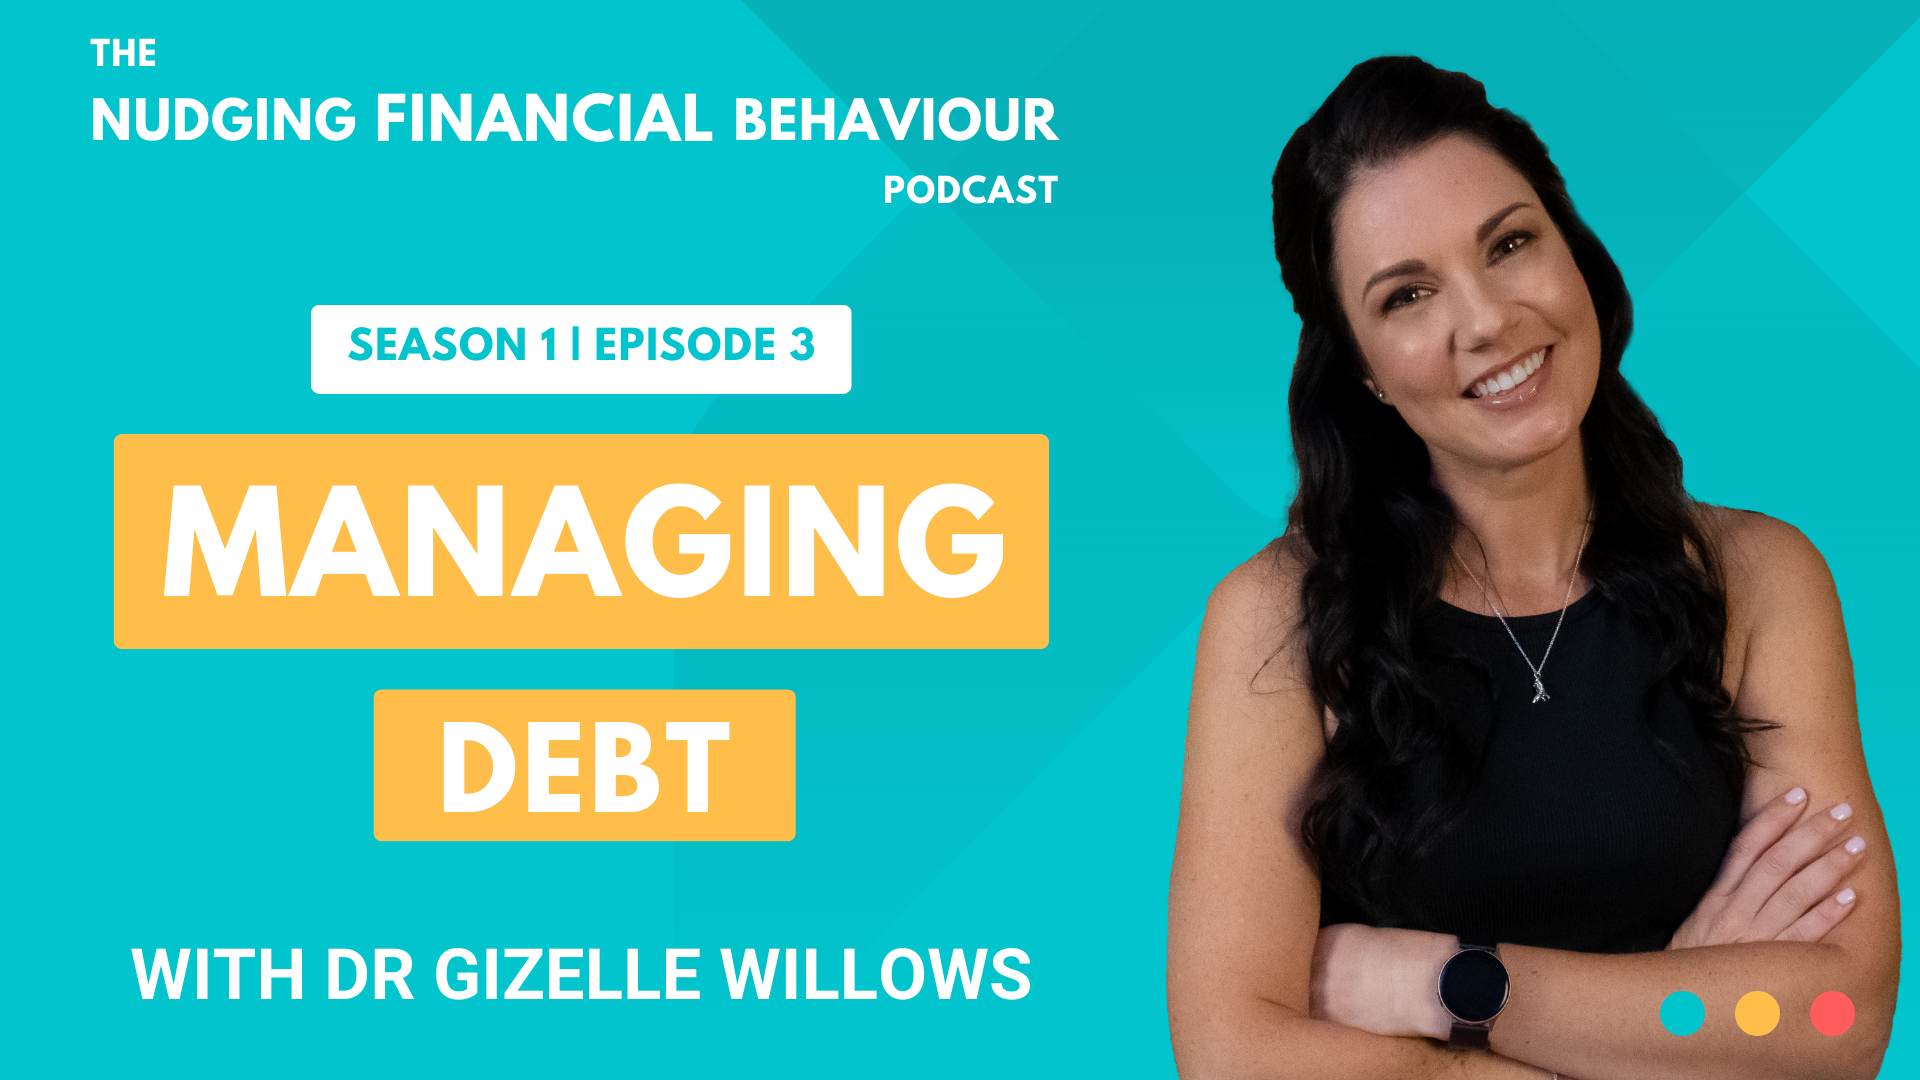 Managing debt on the Nudging Financial Behaviour podcast